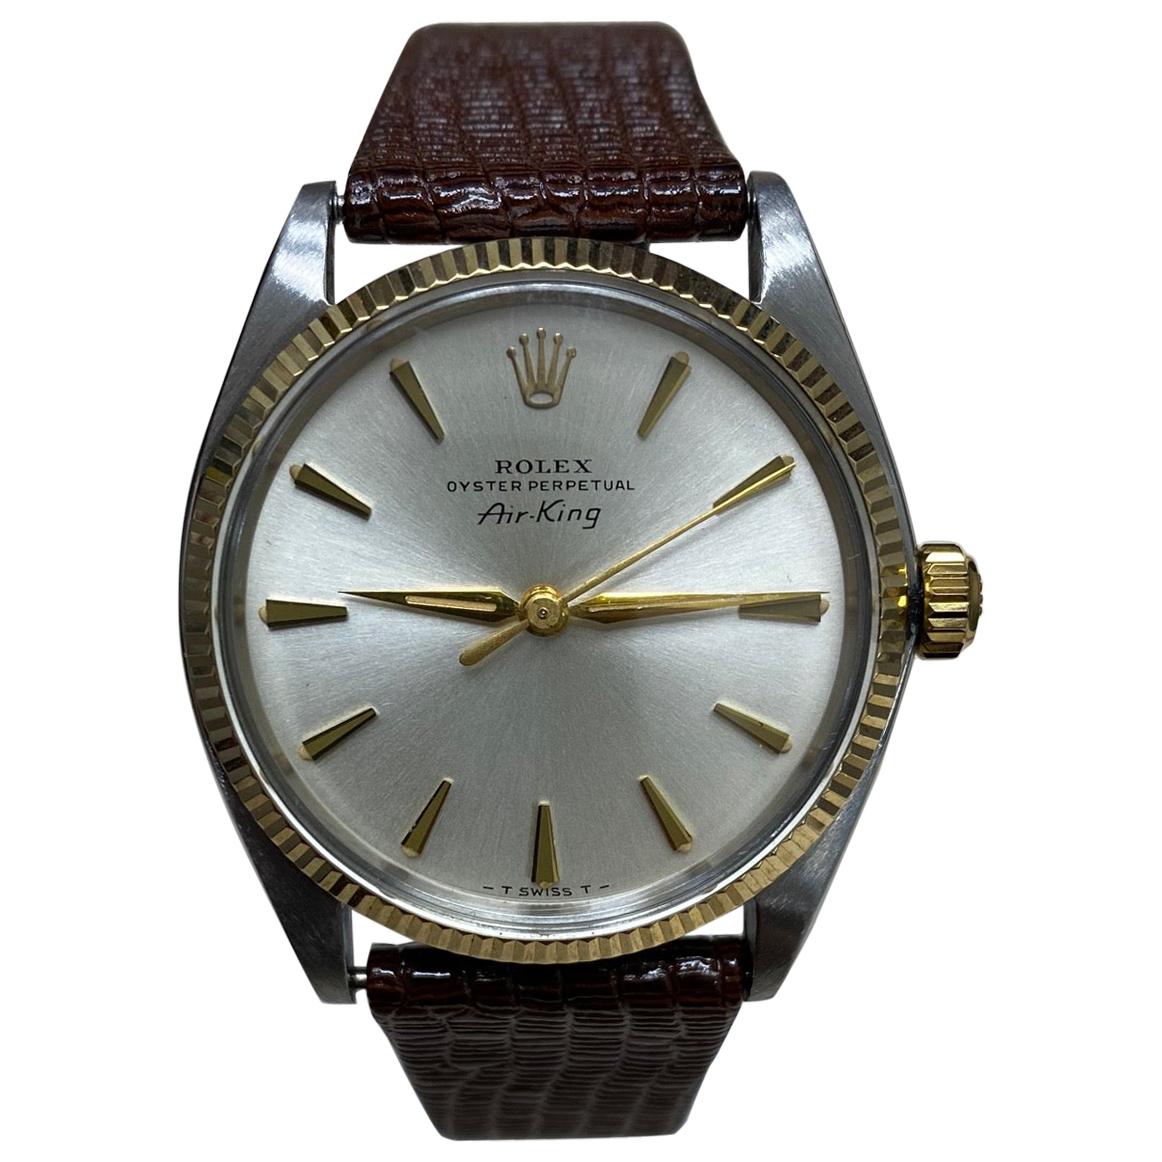 Rolex Air King 5501 14 Karat Yellow Gold Stainless Steel Leather Strap